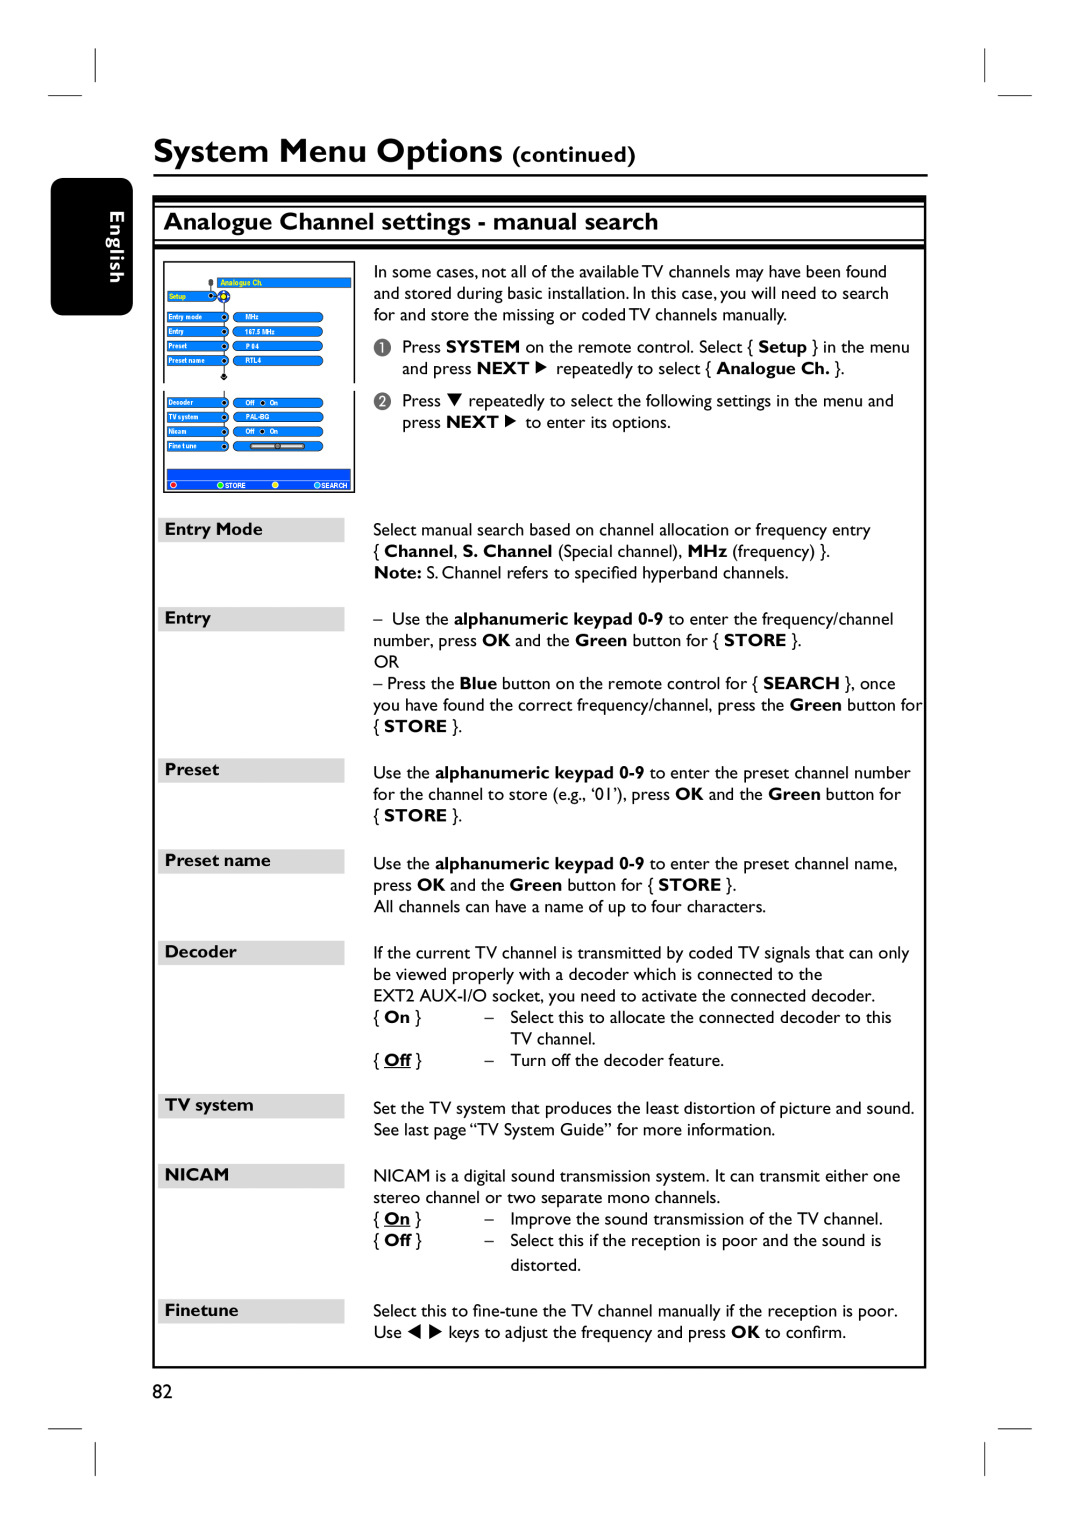 Philips DVDR3360H user manual Analogue Channel settings - manual search, System Menu Options continued, Store 